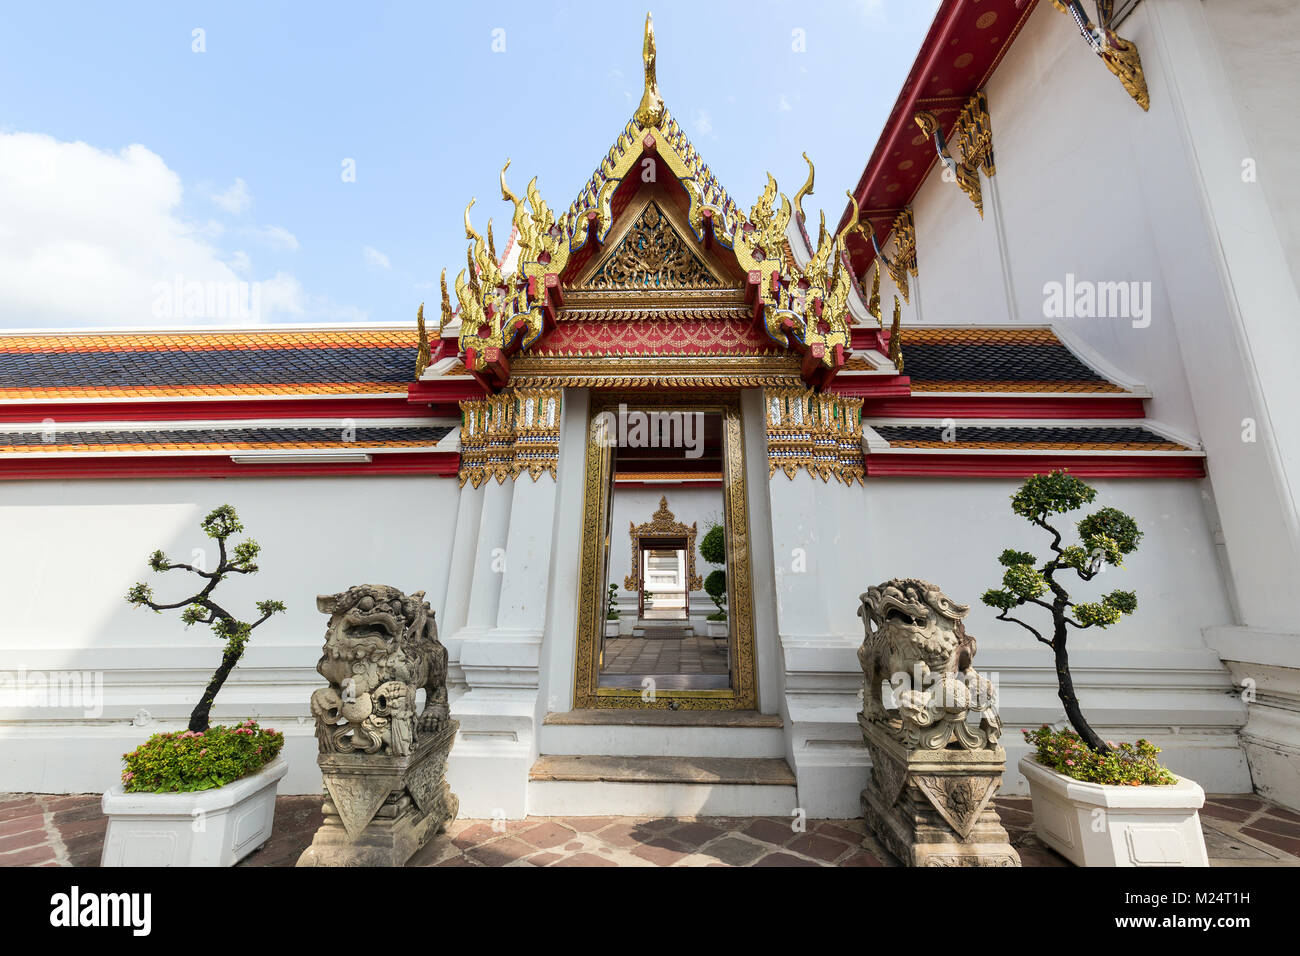 Two statues in front of a decorated and open door and gate at the Wat Pho (Po) temple complex in Bangkok, Thailand, on a sunny day. Stock Photo